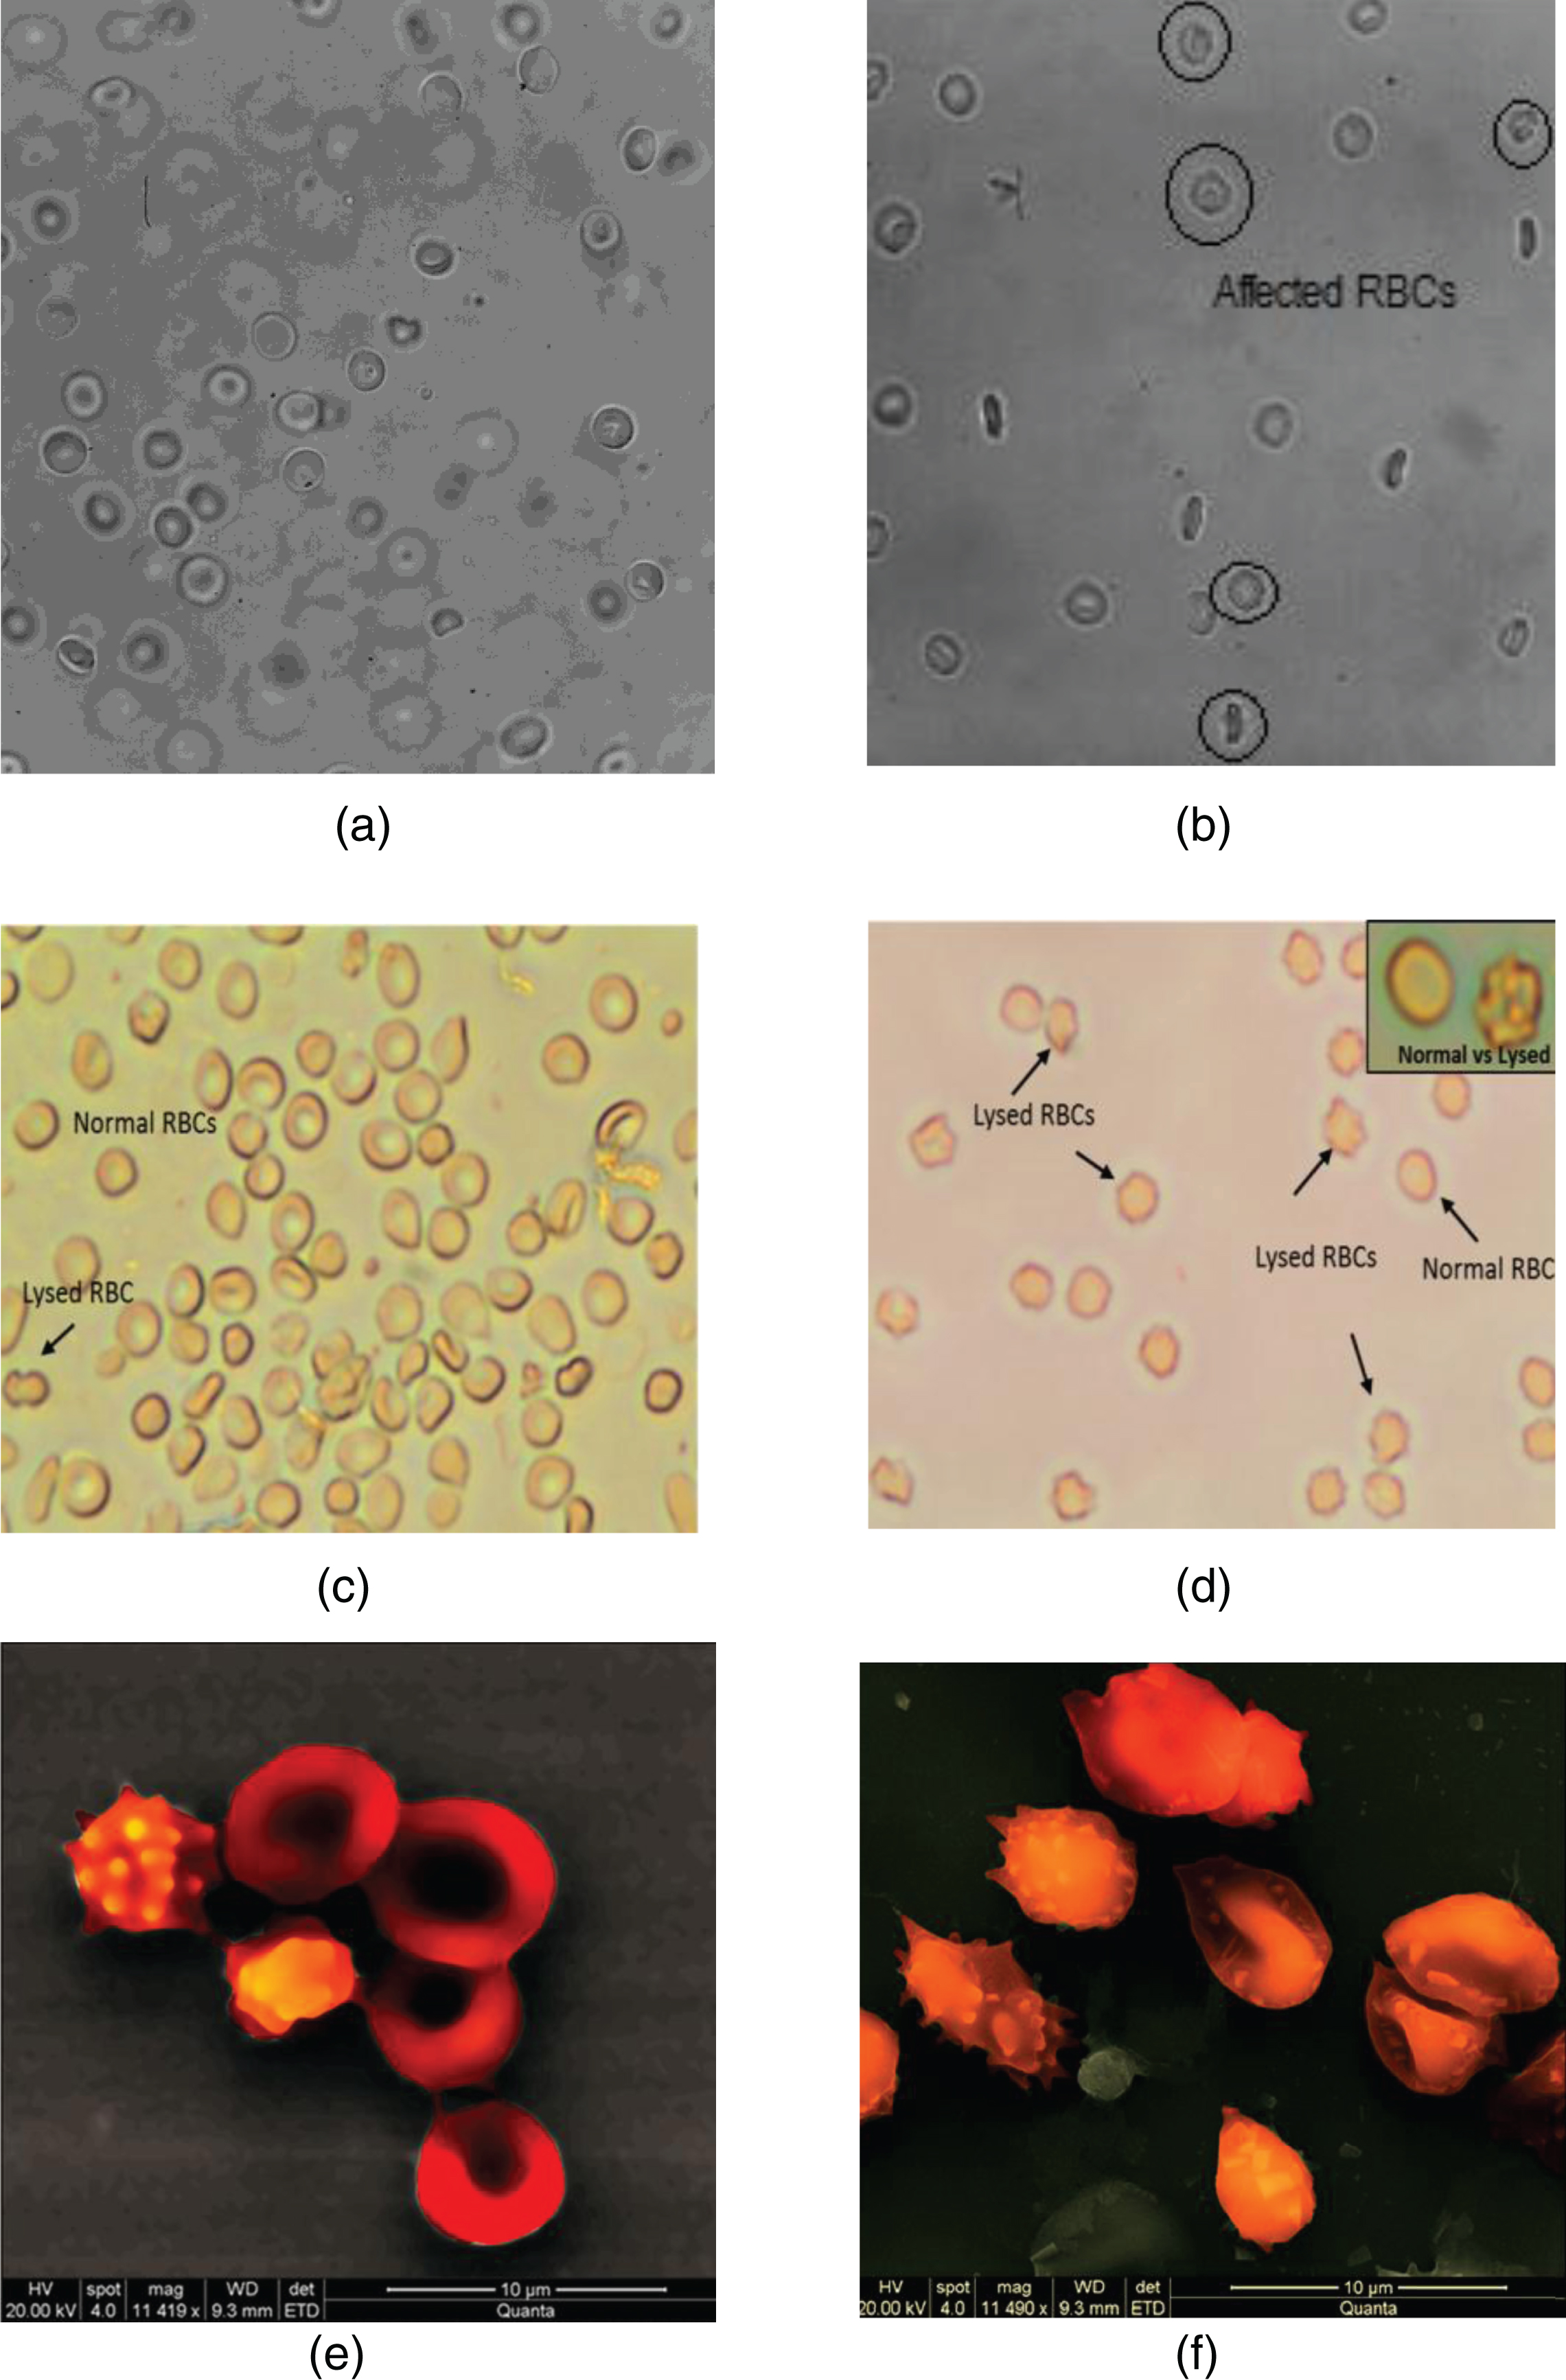 Representative images of RBCs captured by conventional microscopy (Panels (a), (b), (c) and (d)) and SEM (panels (e) and (f)). The images in Panels (a) and (b) have been captured from samples infused in the stented configuration, for the BL and the Q70 conditions respectively. The images in Panels (c) and (d) illustrate the appearance of a population of affected RBCs for the Q35 condition. Panels (e) and (f) show details of affected RBCs.